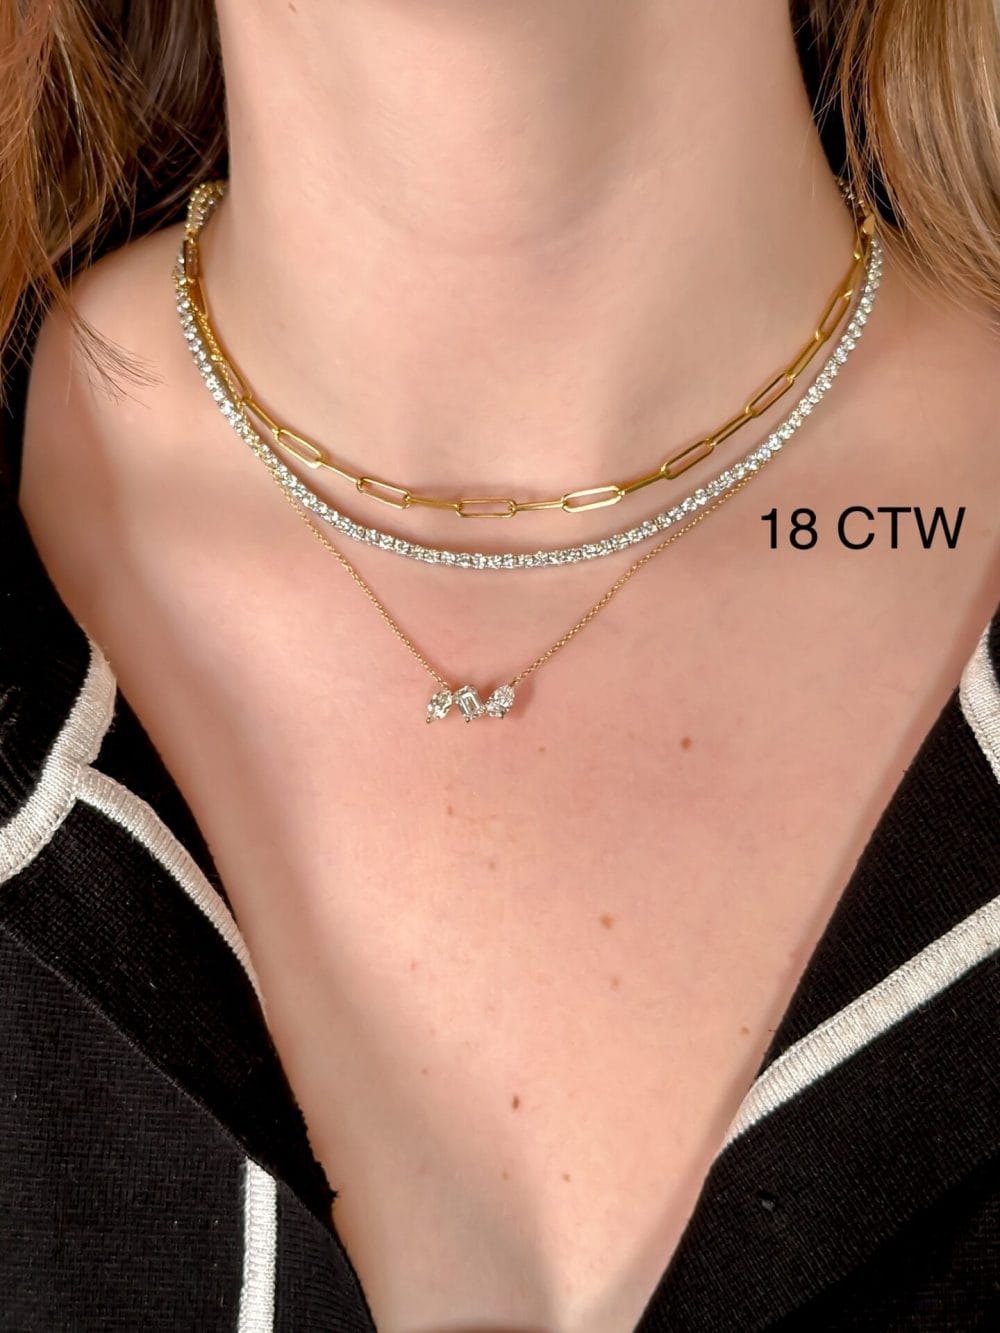 18 CTW Tennis Necklace Layered